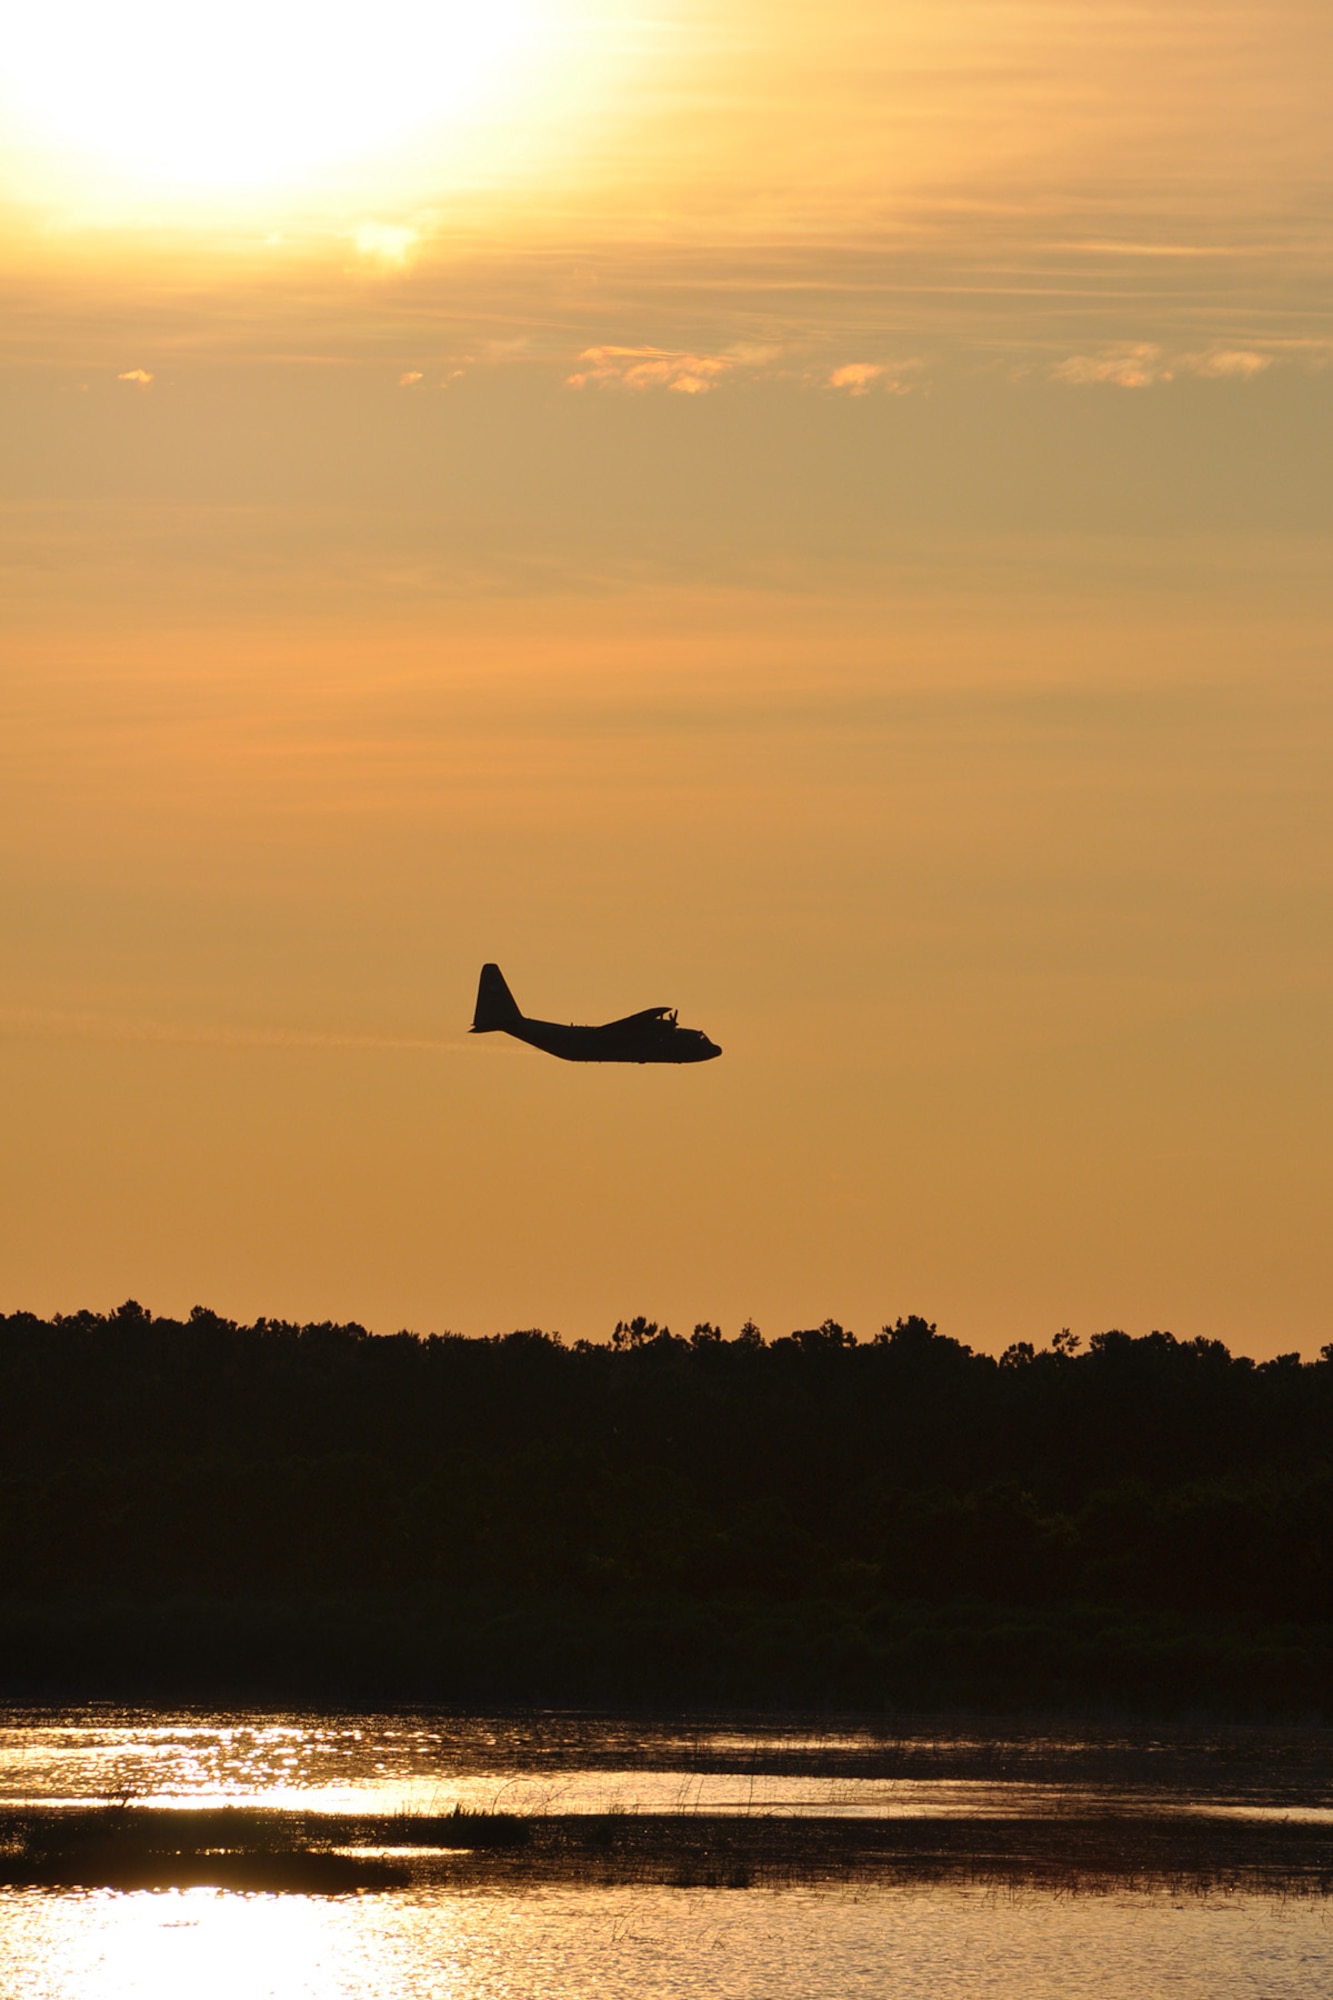 Joint Base Charleston – Weapons Station, S.C. – A specially-modified Air Force Reserve C-130 Hercules tactical cargo aircraft, assigned to the 910th Airlift Wing, based at Youngstown Air Reserve Station, Ohio, disperses a water-diluted EPA-approved insecticide over an area known as the spoils site here, June 15, 2013. The 30-acre spoils site is known to produce approximately 40-million mosquitoes per acre, or 1.2 billion of the pest insects, annually. The 910th’s Aerial Spray Unit conducted spraying operations here, June 15, 2013 to control the population of the disease-carrying pest insects at the installation. The 910th’s 757th Airlift Squadron is home to the Department of Defense’s only large-area, fixed-wing aerial spray capability. U.S. Air Force photo by Master Sgt. Bob Barko Jr.